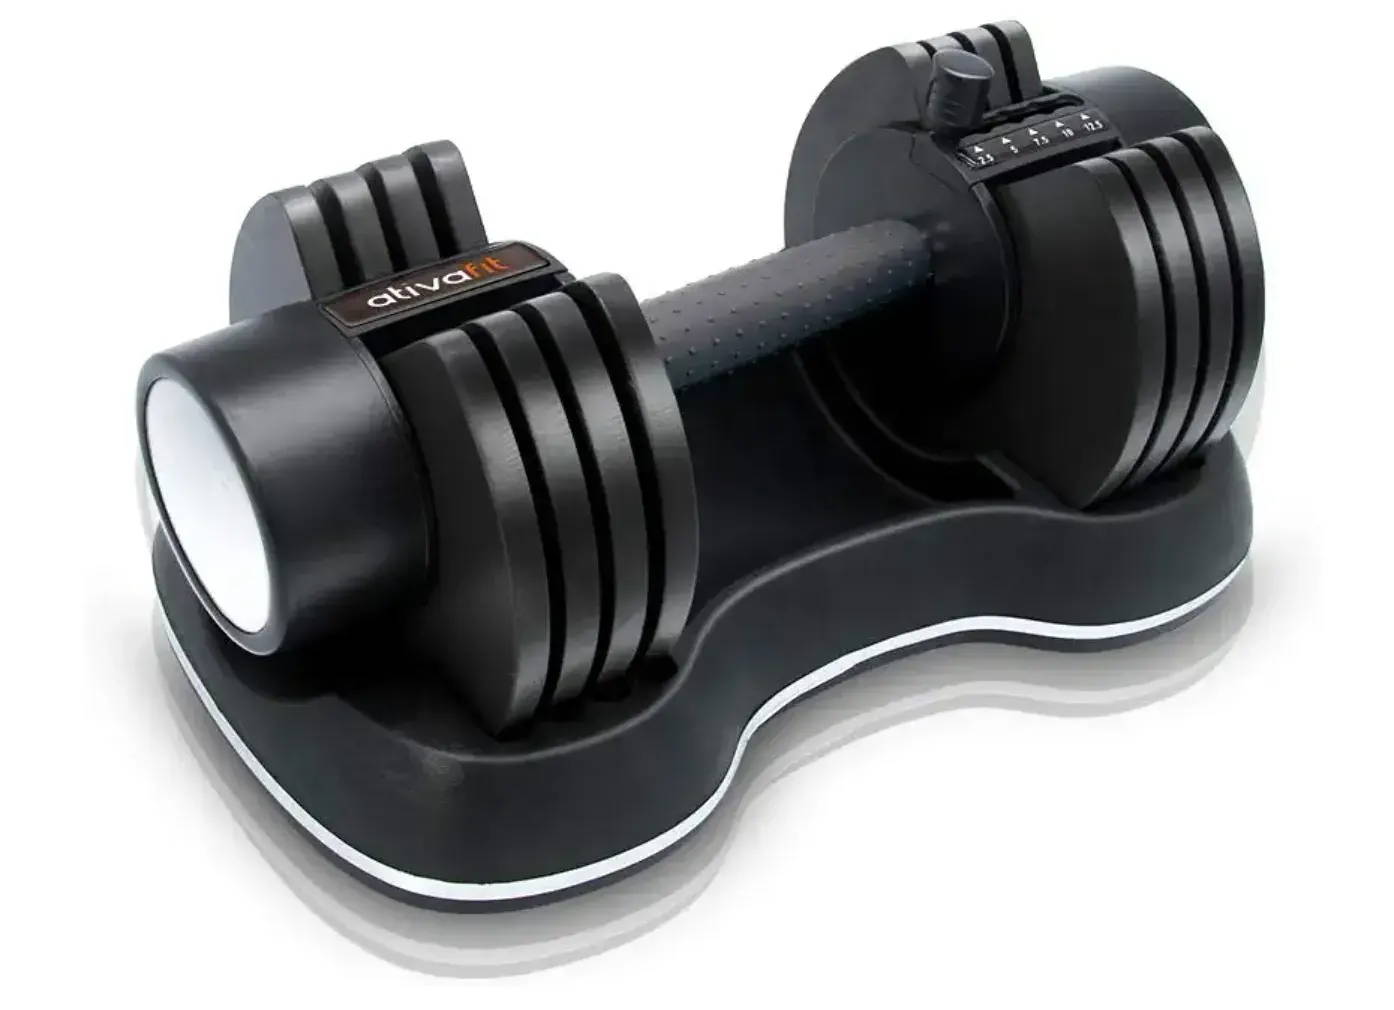 Ativafit Adjustable Dumbbell Weights